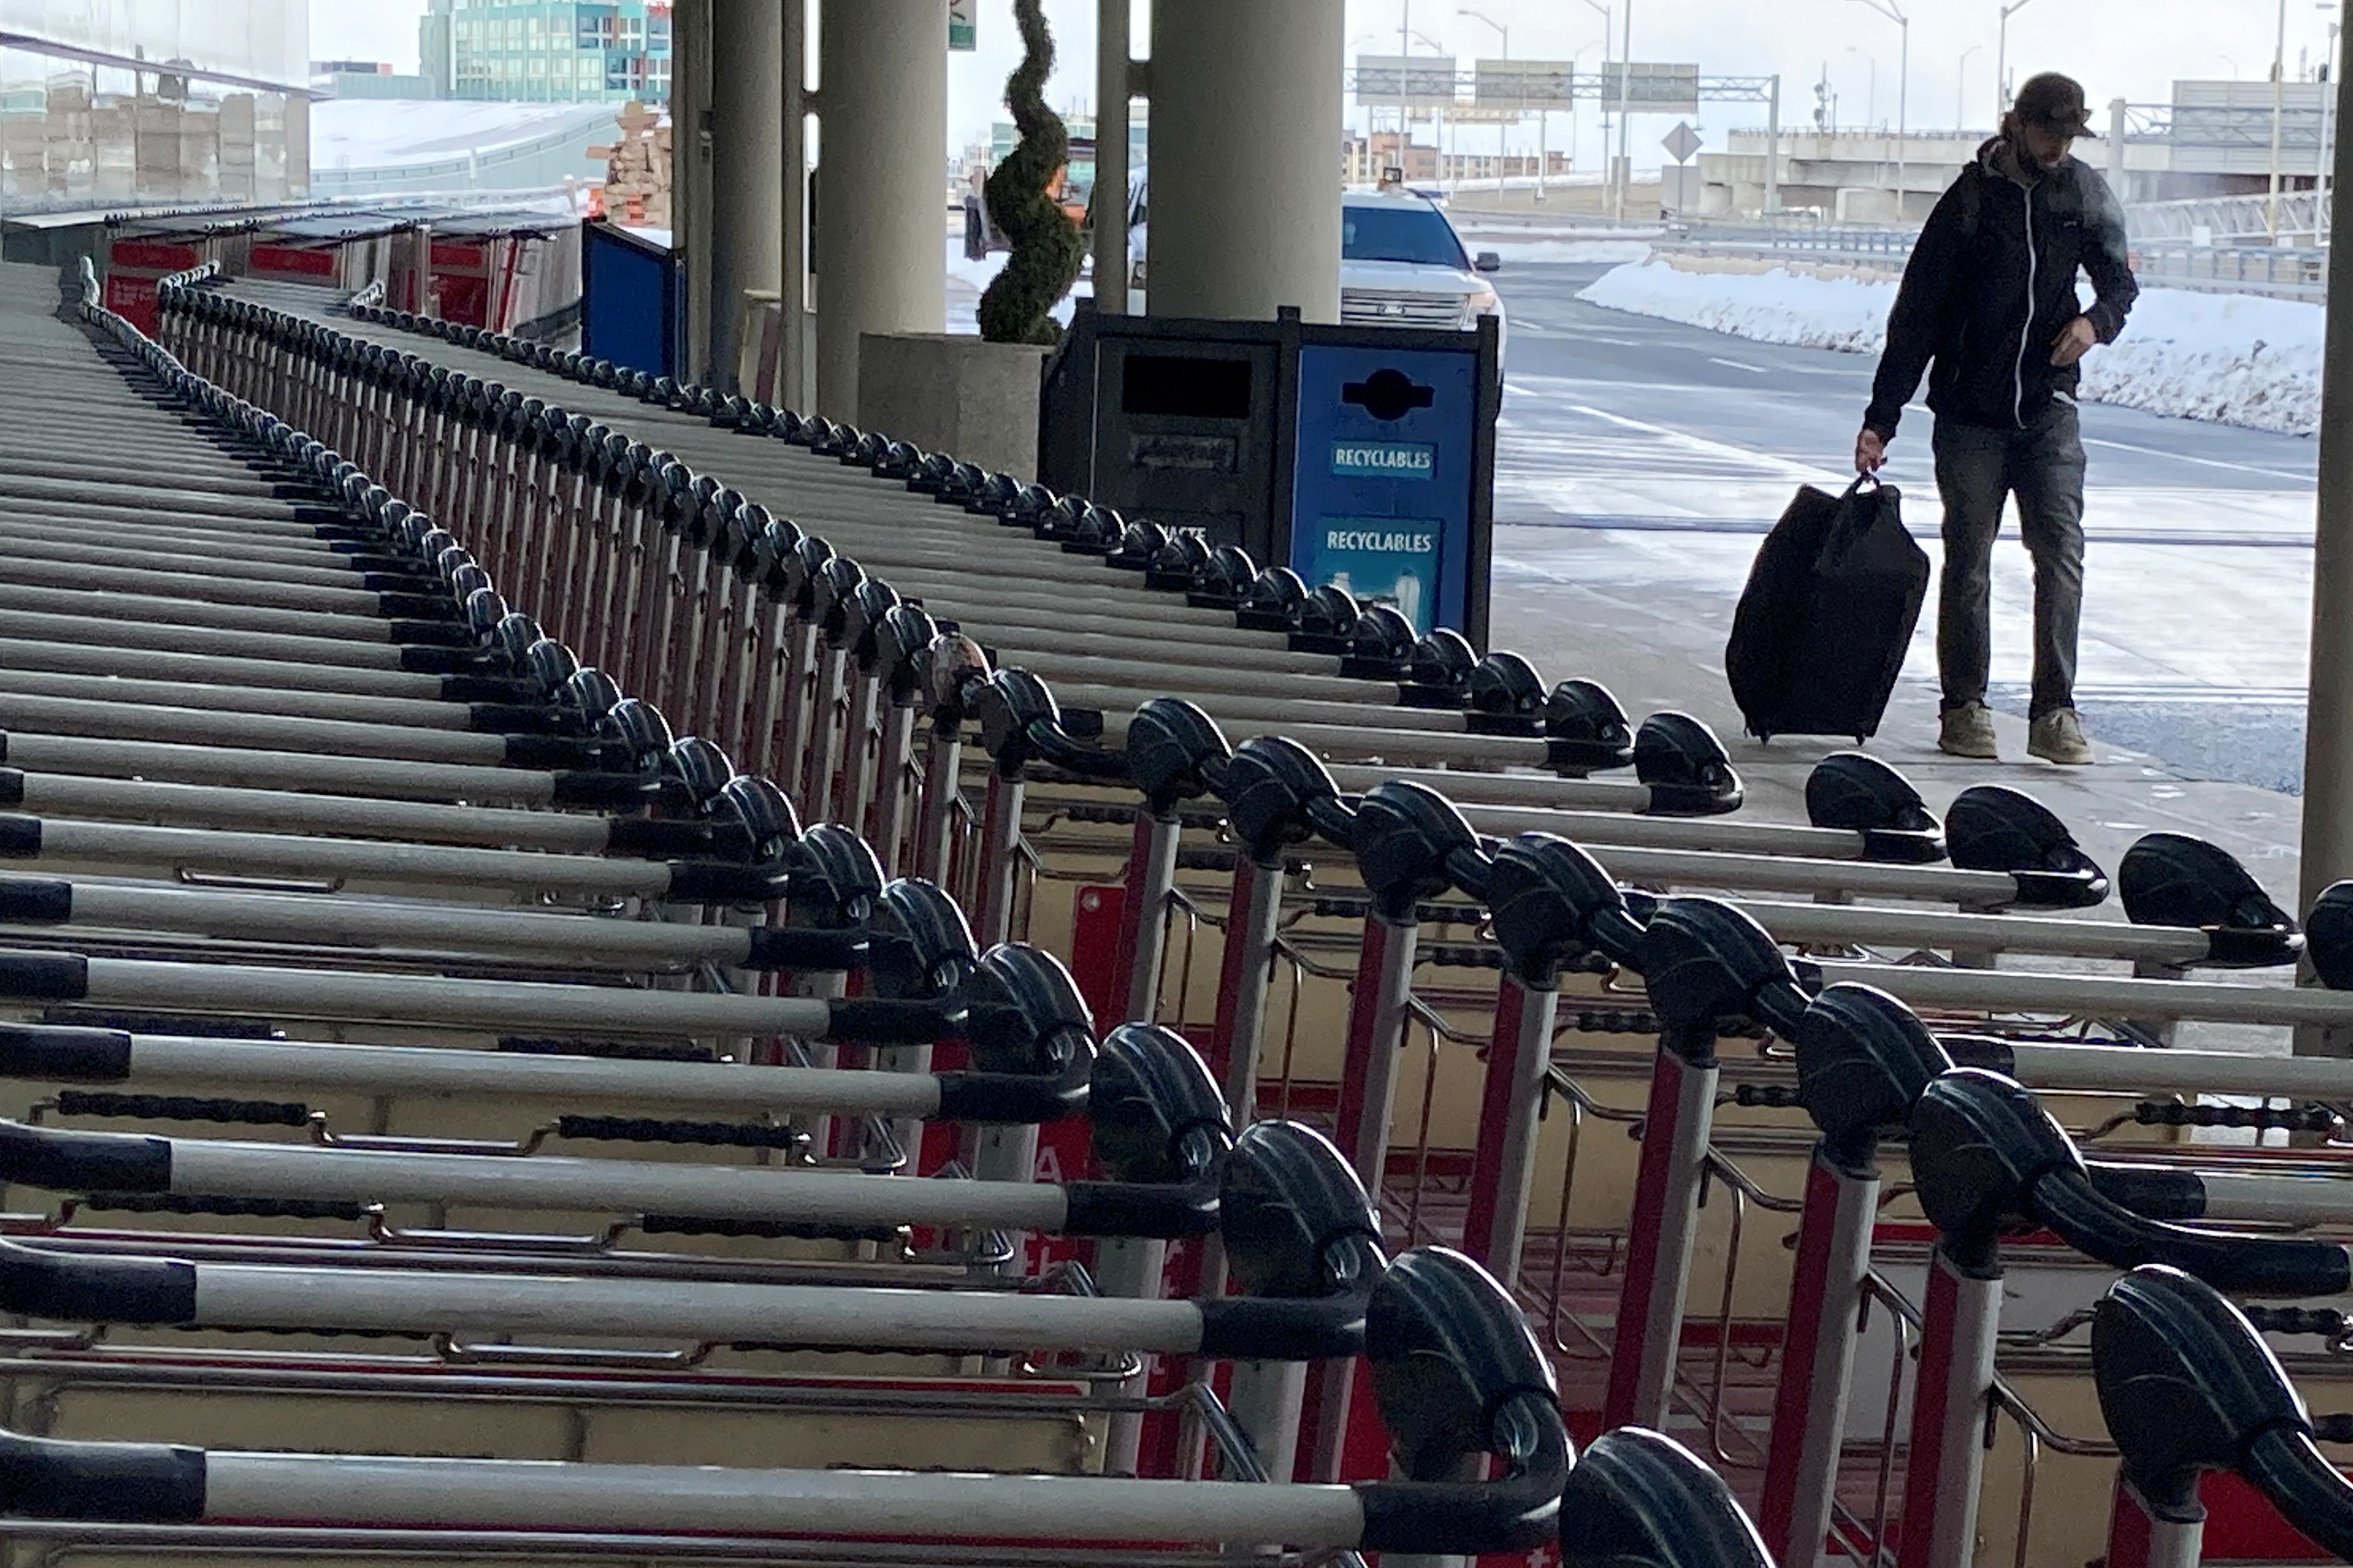 A man pulls his luggage past baggage carts at Toronto Pearson International Airport in Mississauga